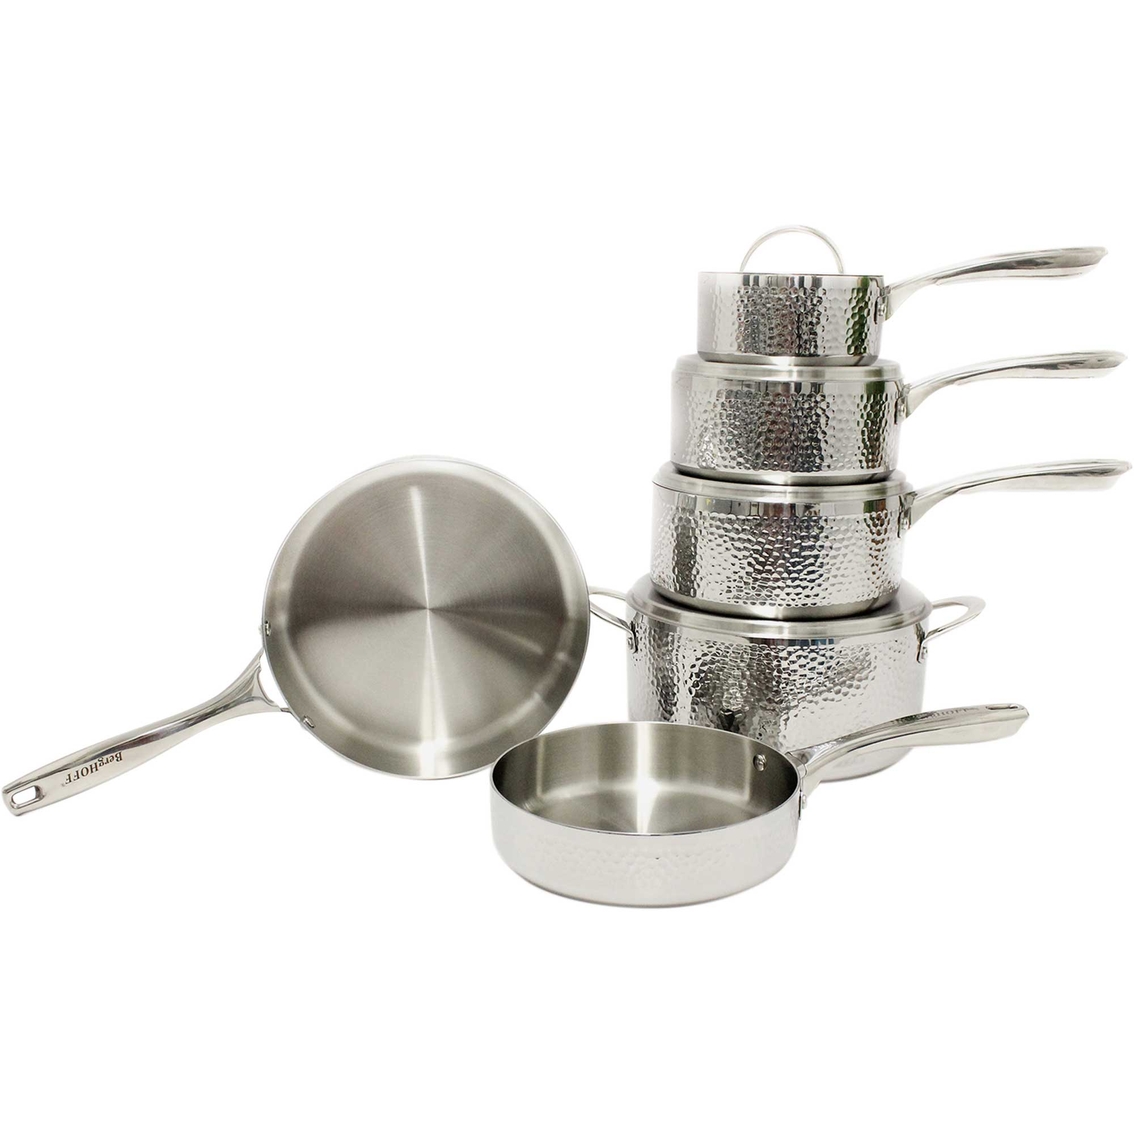 Berghoff's Vintage Hammered Tri Ply Stainless Steel Cookware 10 pc. Set - Image 3 of 10